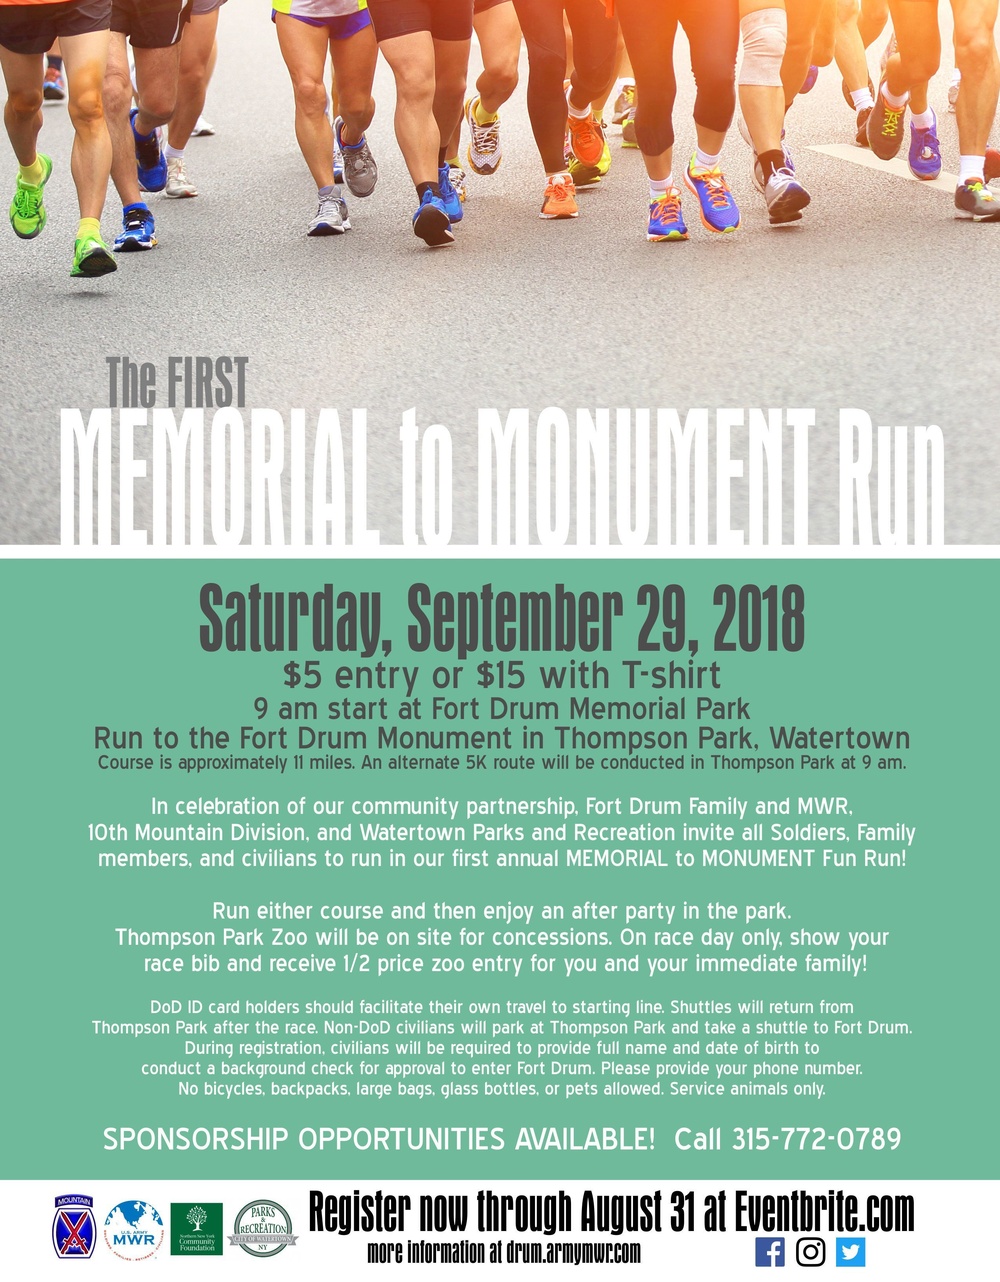 First-ever Memorial to Monument Run to bring communities together at Fort Drum